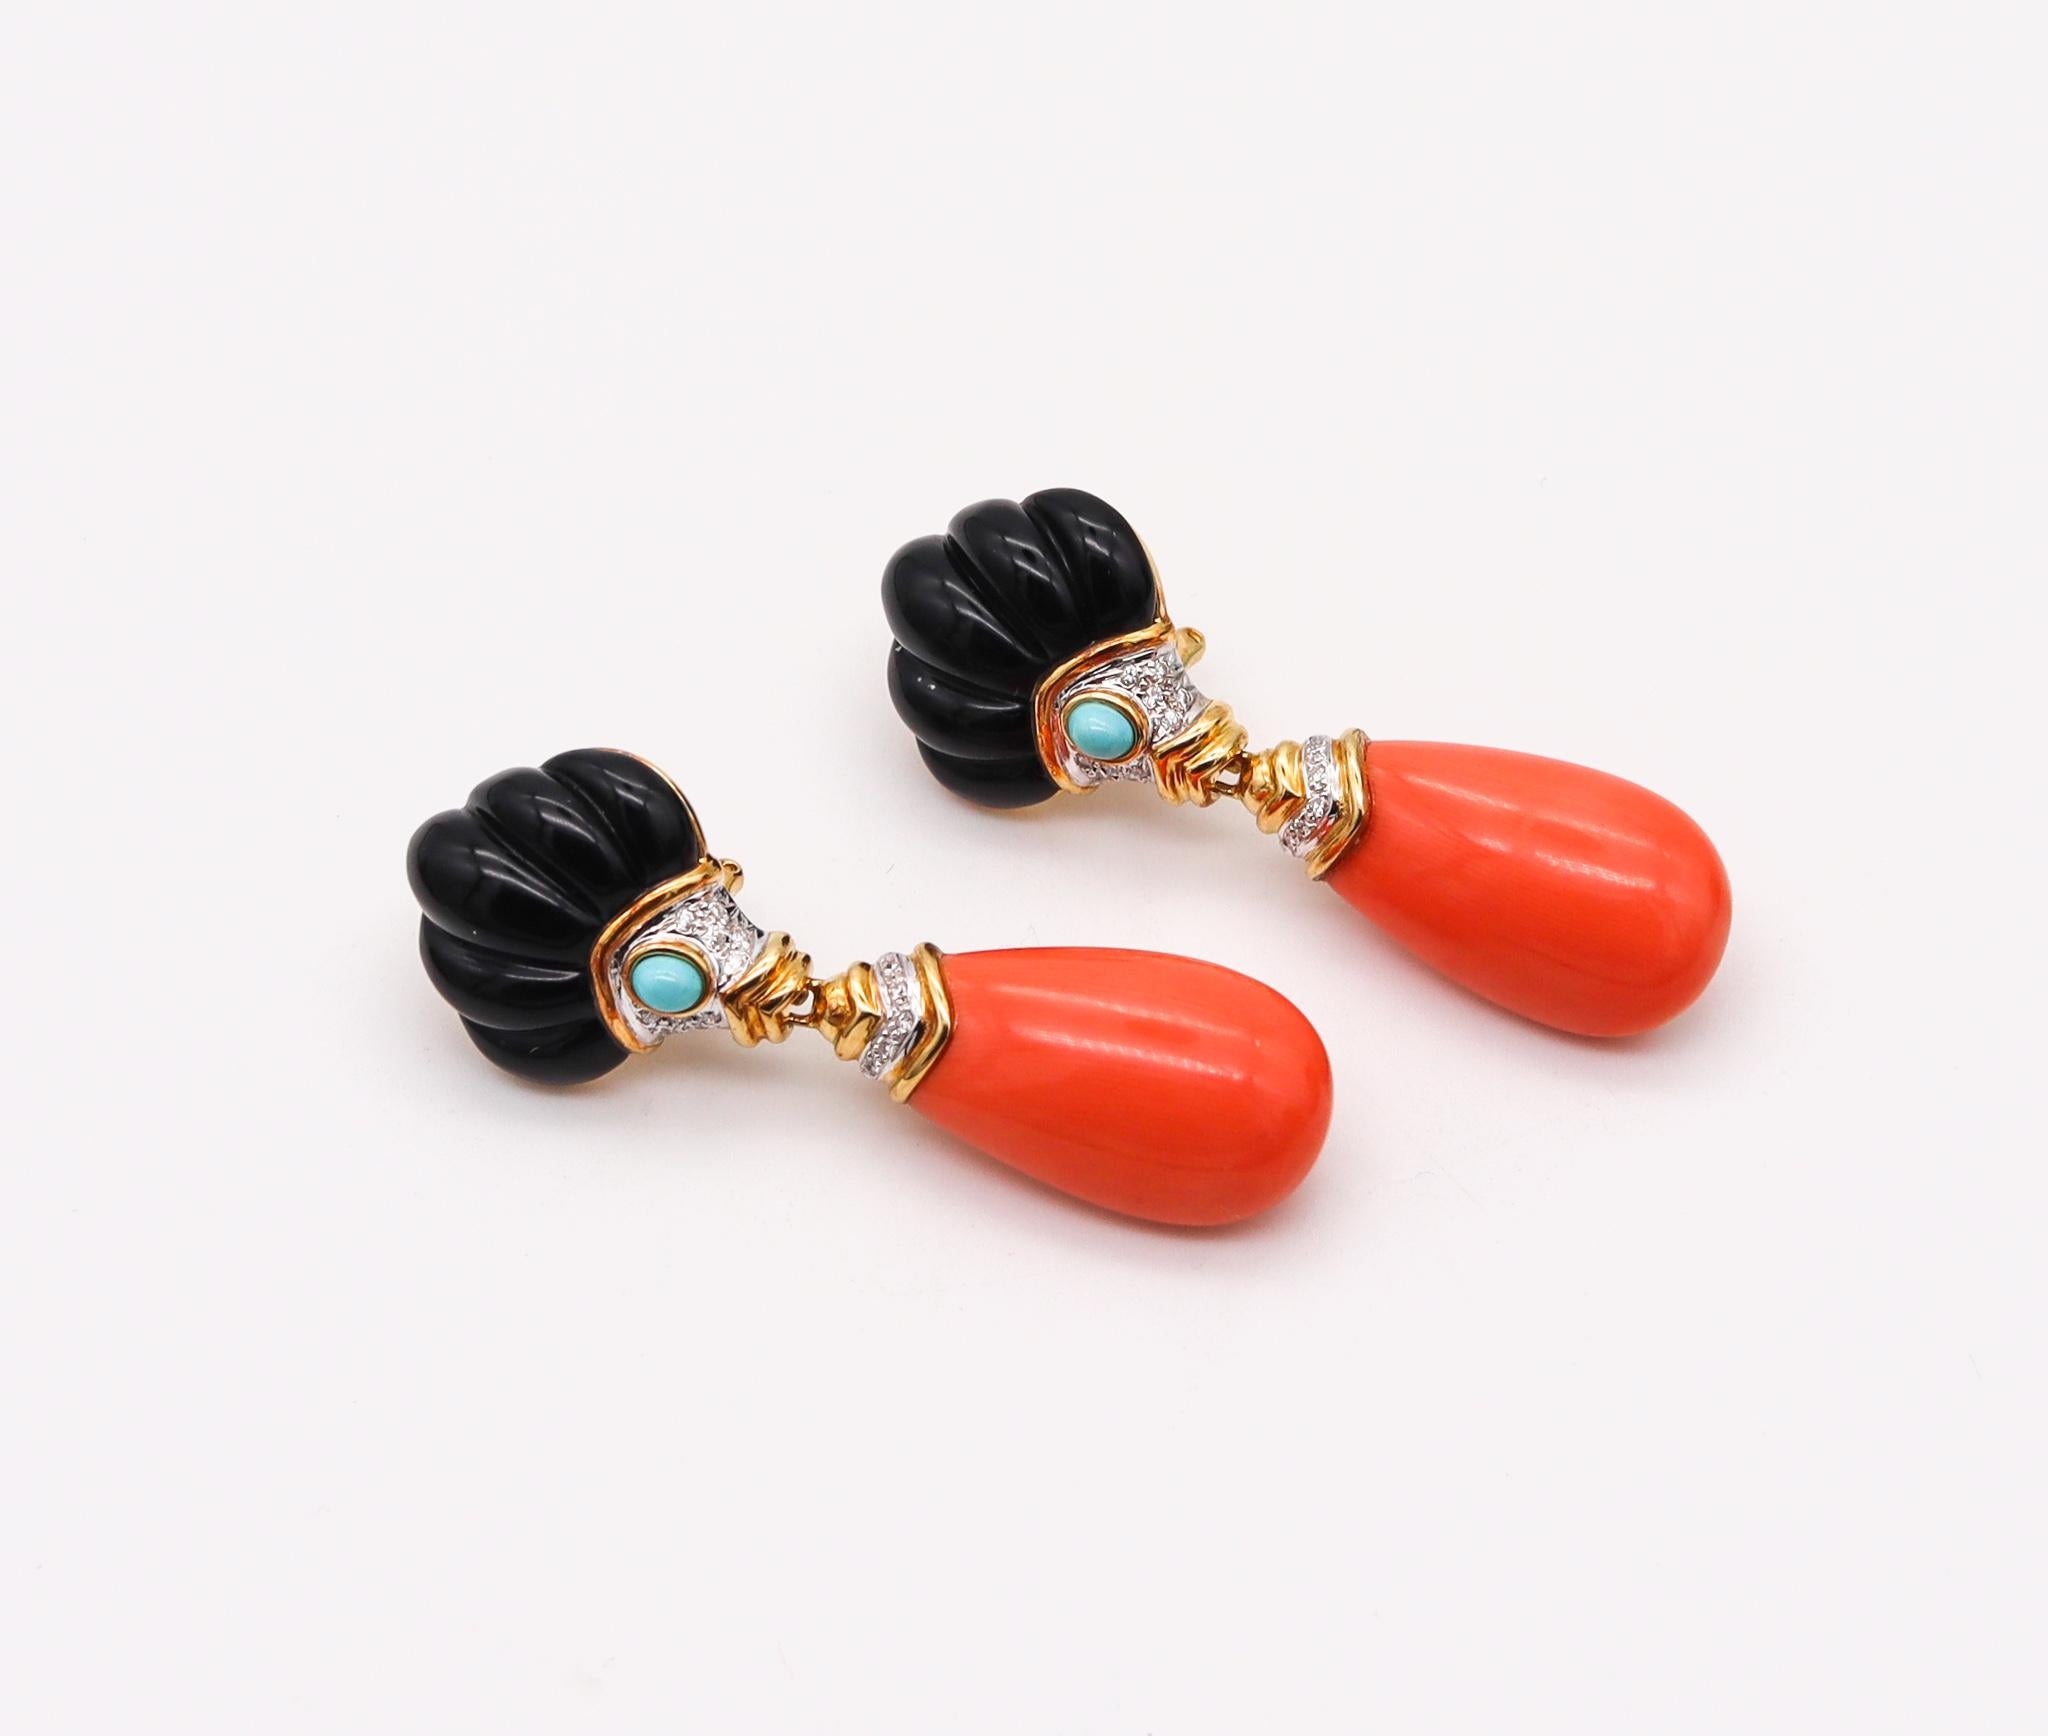 Modernist Italian Convertible Coral Drop Earrings in 18kt Gold with 57.44 Ctw in Diamonds